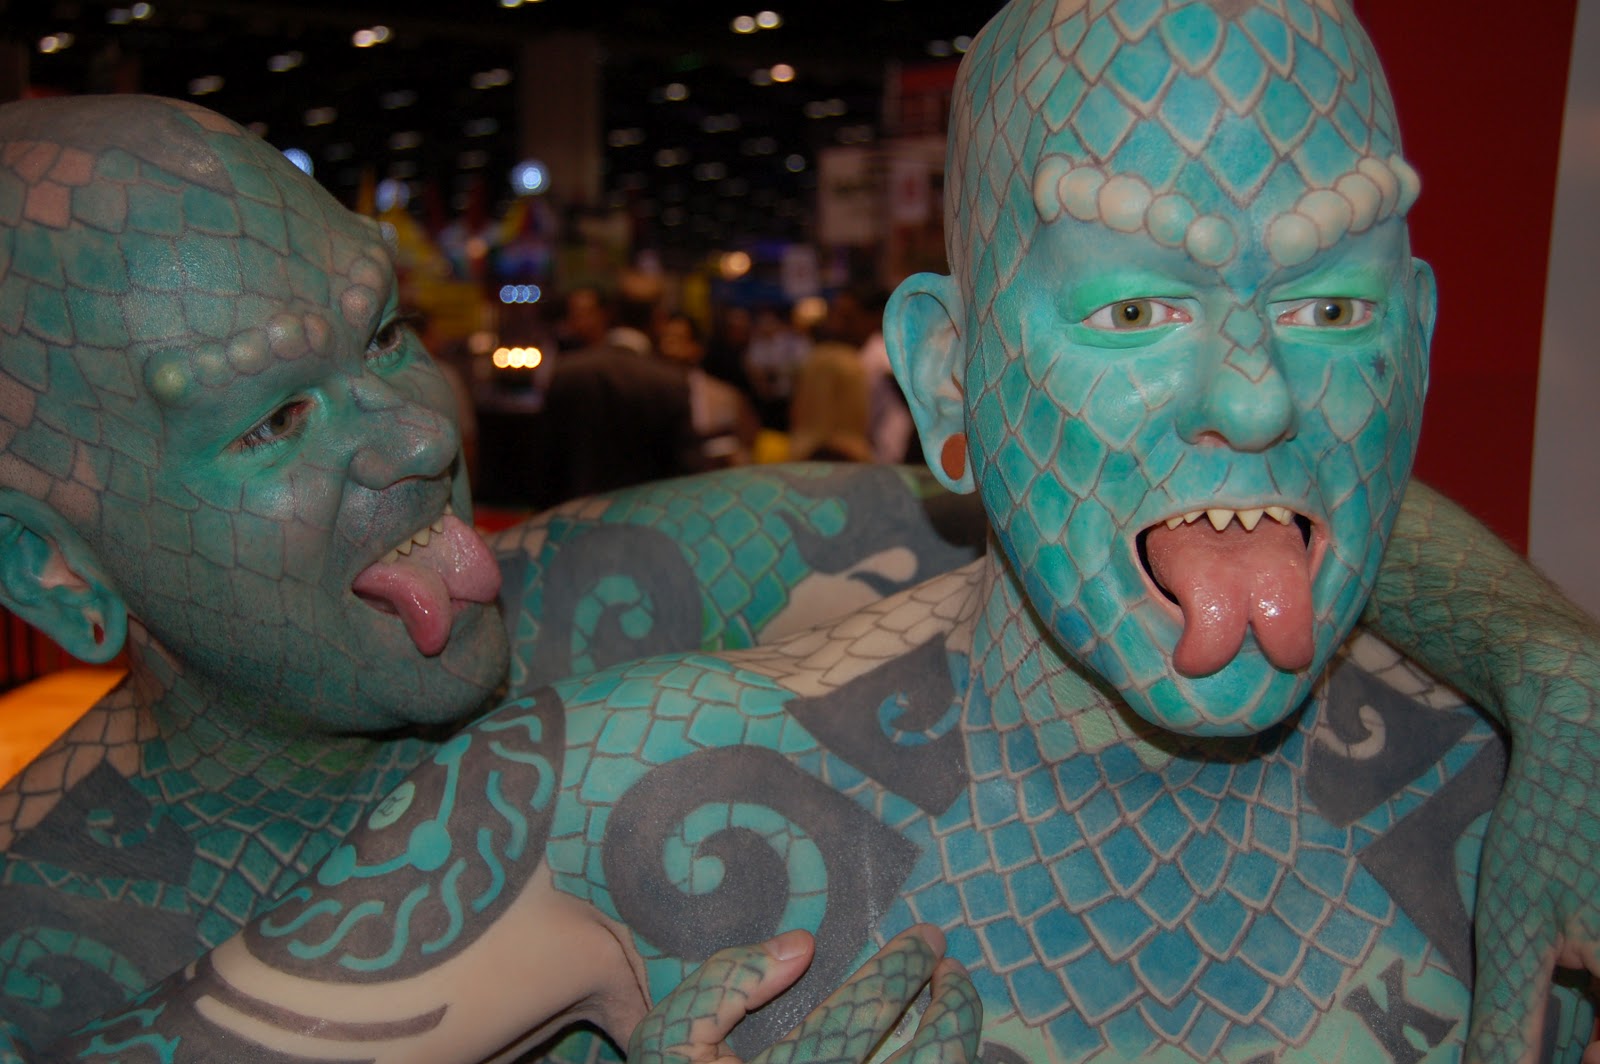 10. Eric Sprague, also known as "The Lizardman", has a full-body tattoo of green scales and has had his teeth filed into sharp points. - wide 9